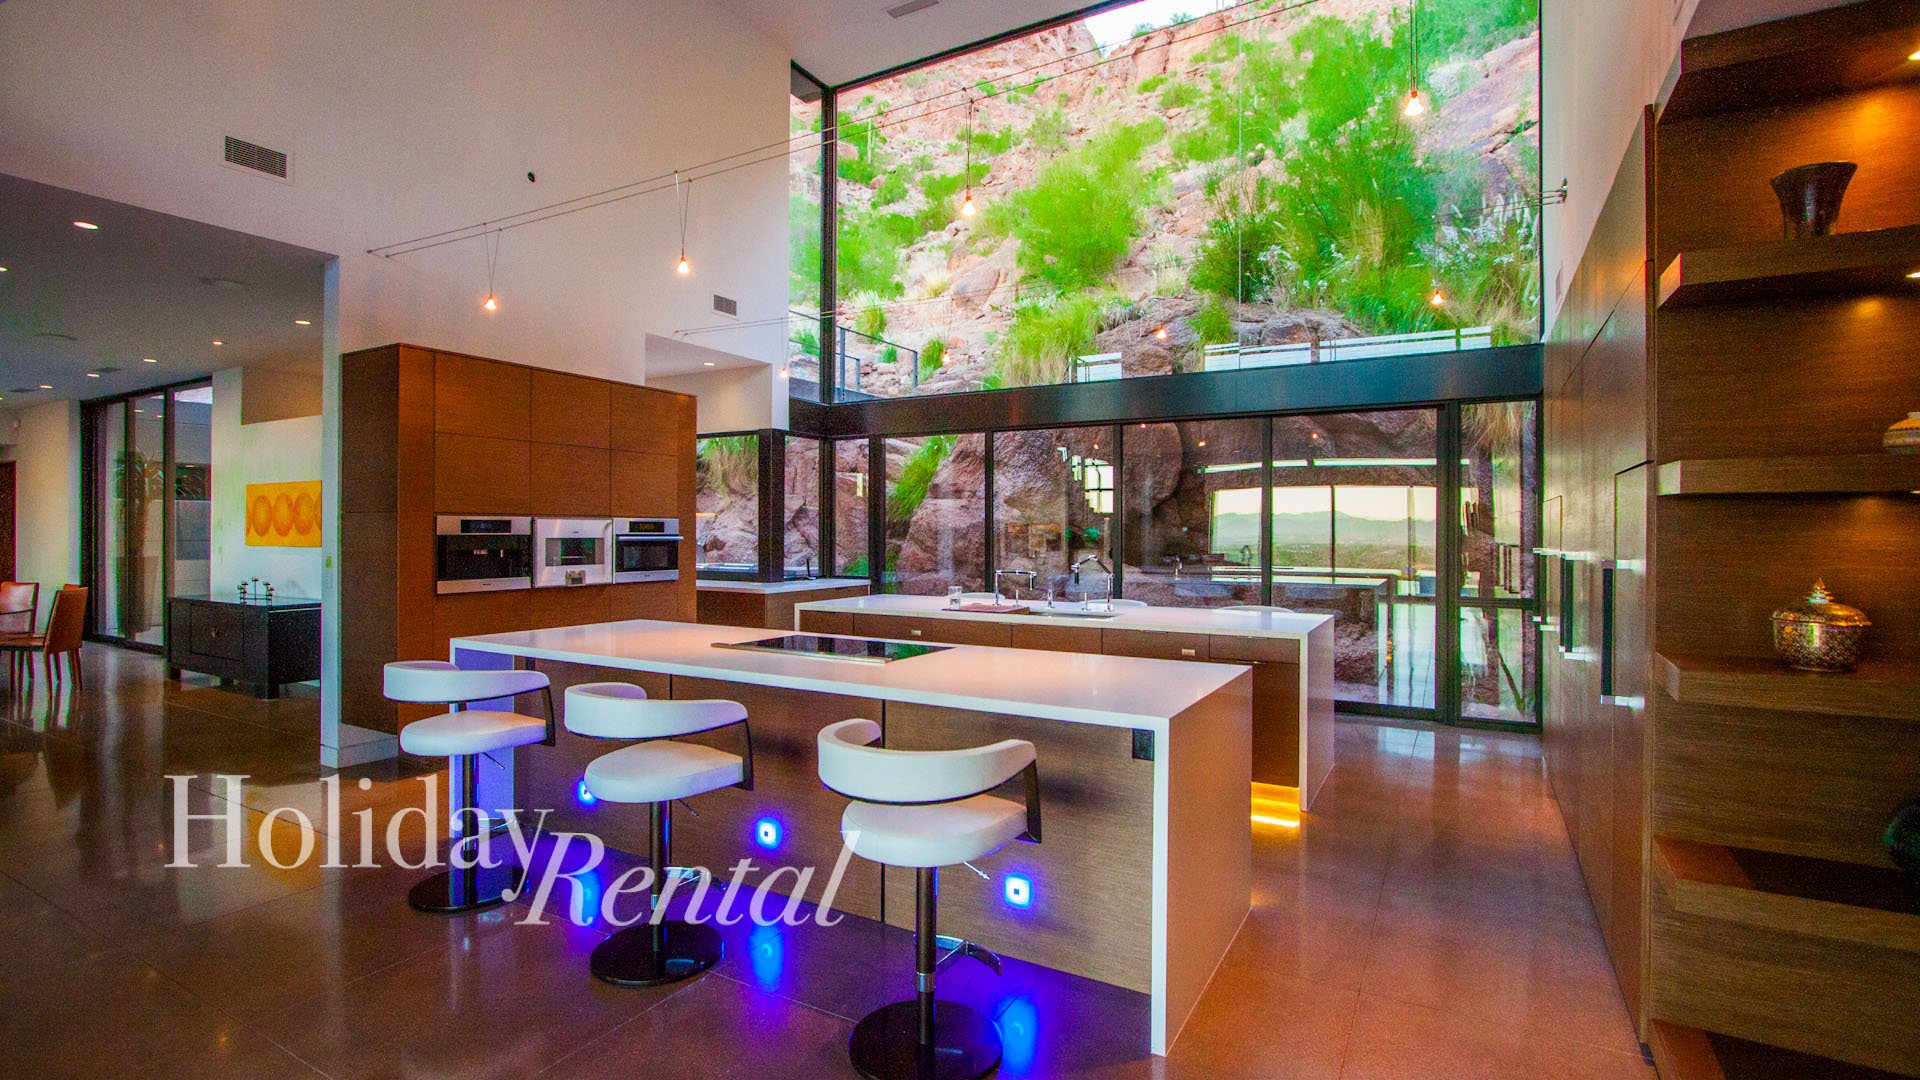 Kitchen with views of the rock waterfall feature